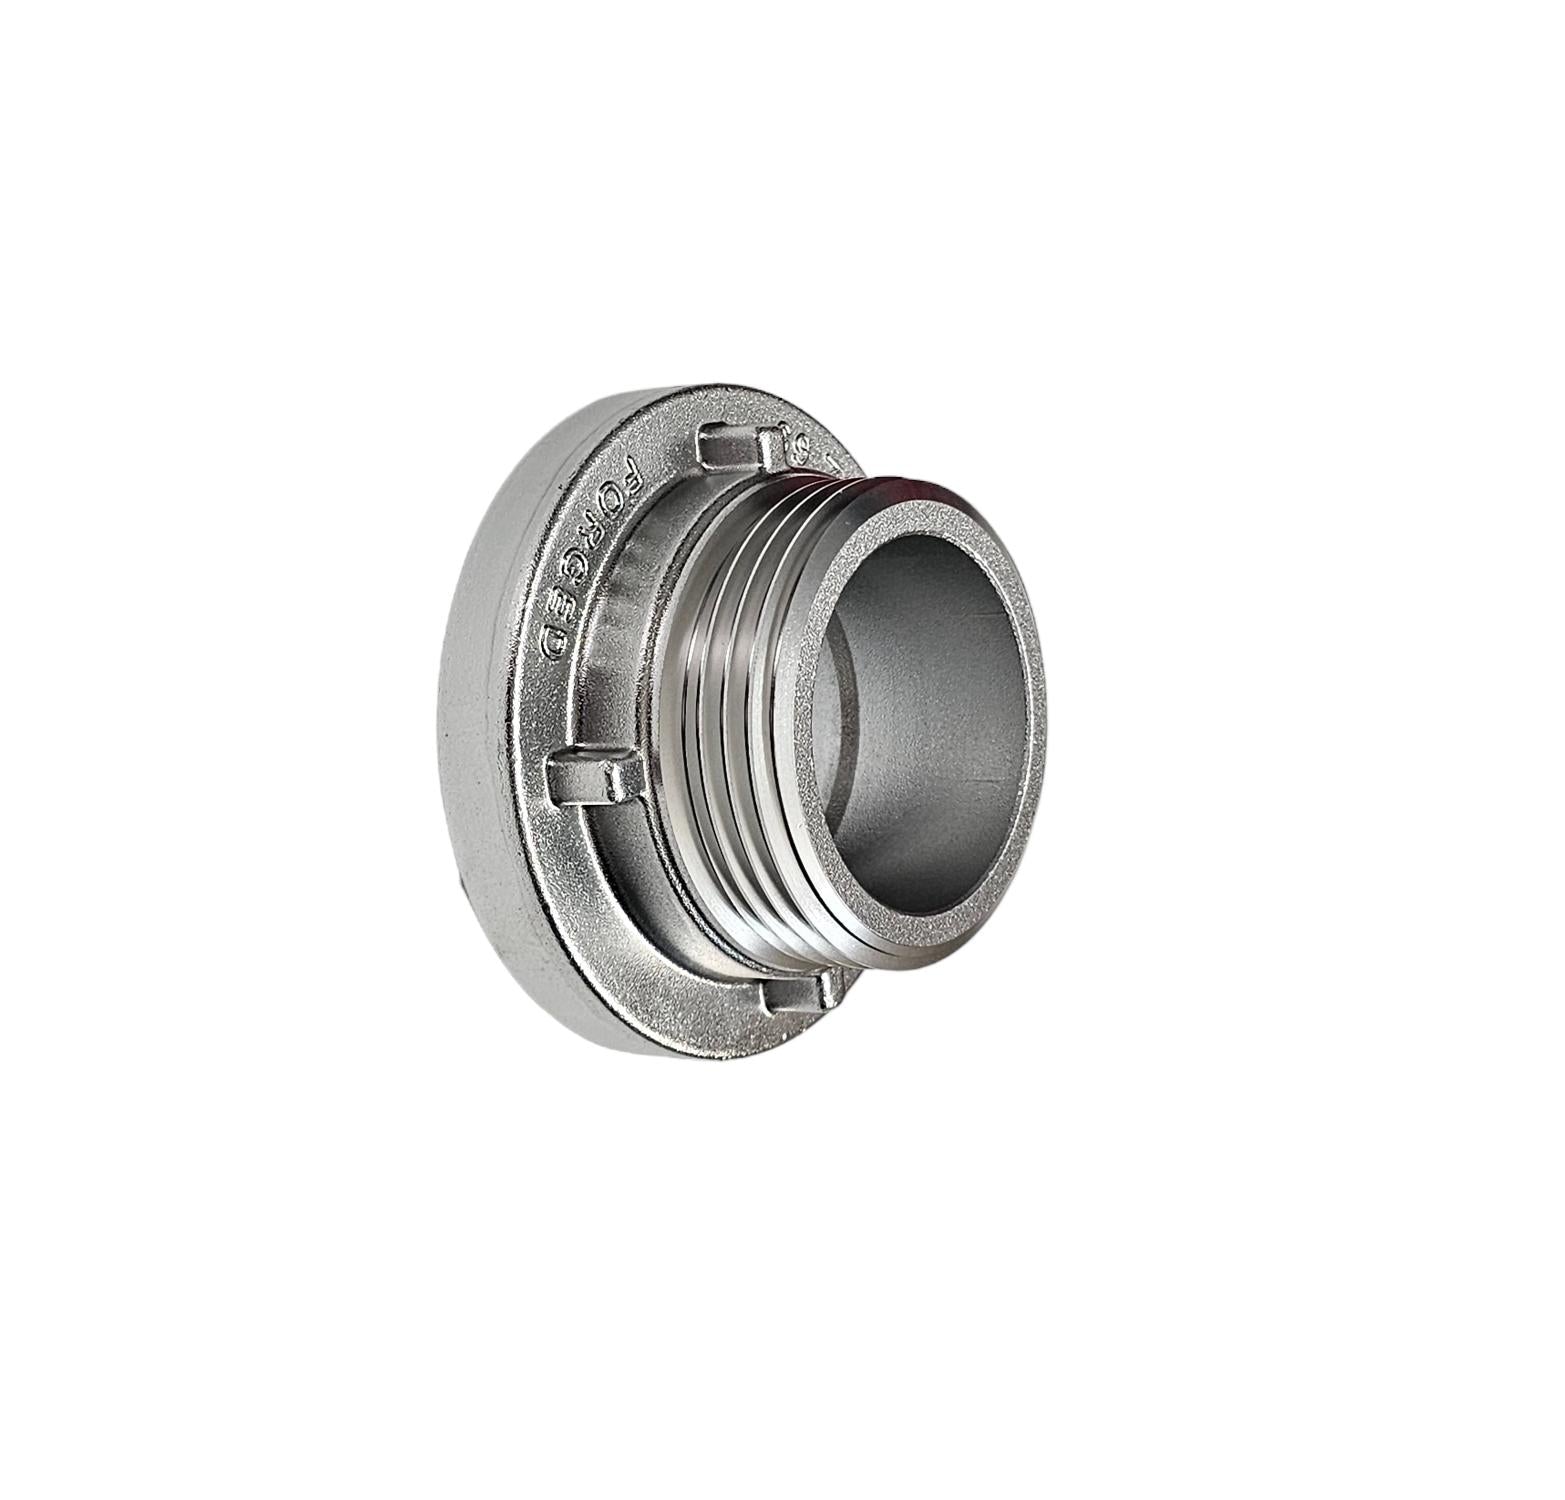 64mm NSW FBT male forged storz adaptor - Premium  from Wolf - Shop now at Firebox Australia